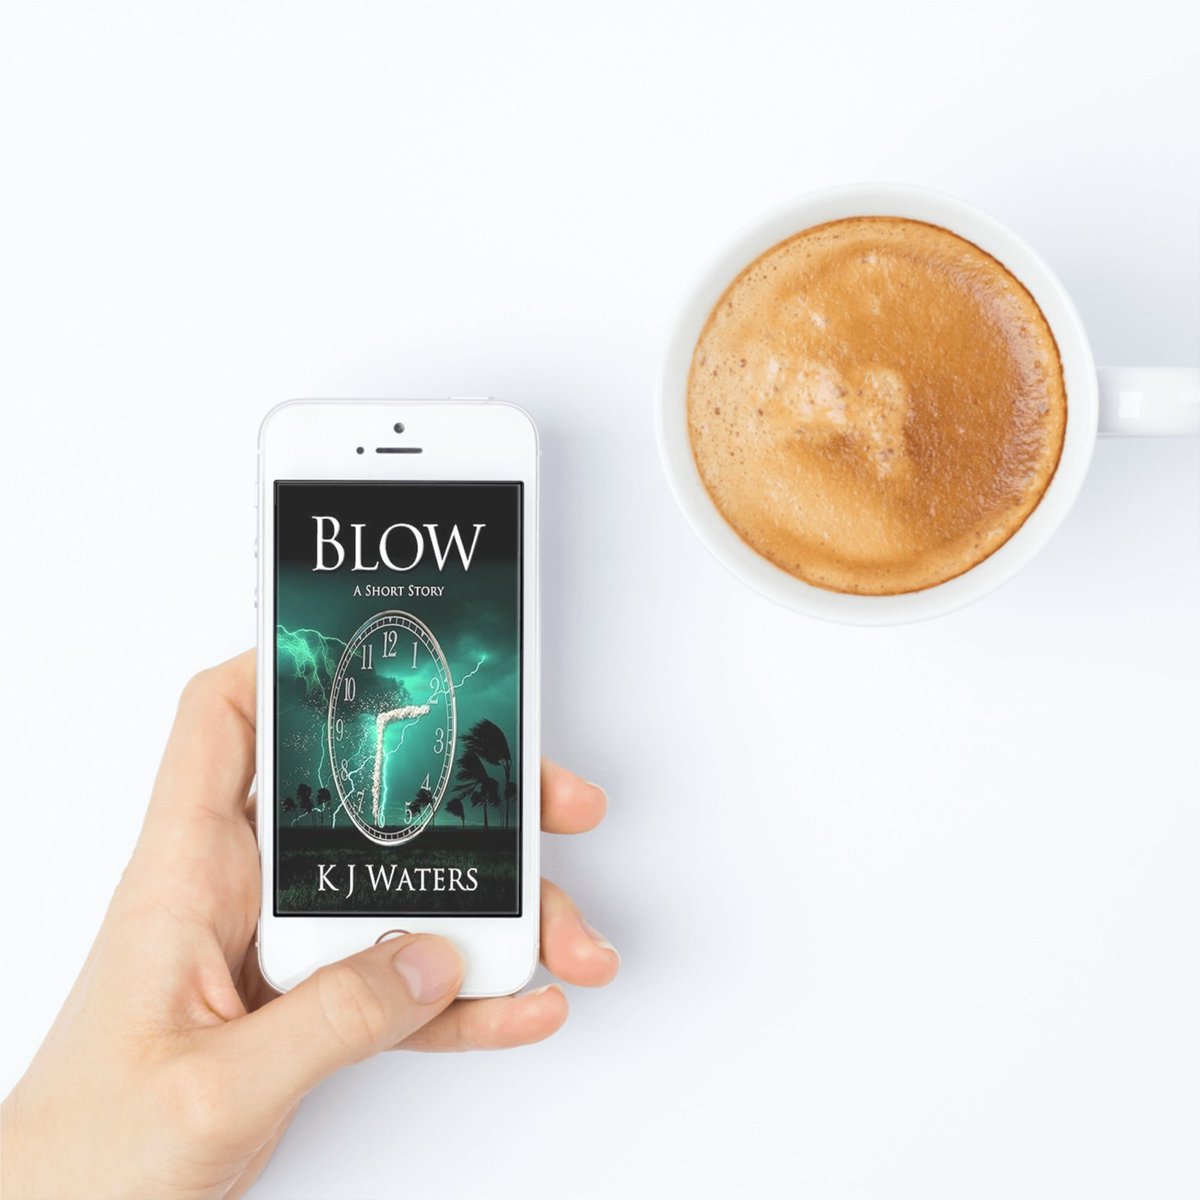 Only 99 cents!

#Hurricane Ivan plays a wicked character in this #shortstory.

Rick shelters a few visitors from the #storm and is faced with his worst #nightmare.

#suspense #thriller #KU #QuickRead

geni.us/Blowlink